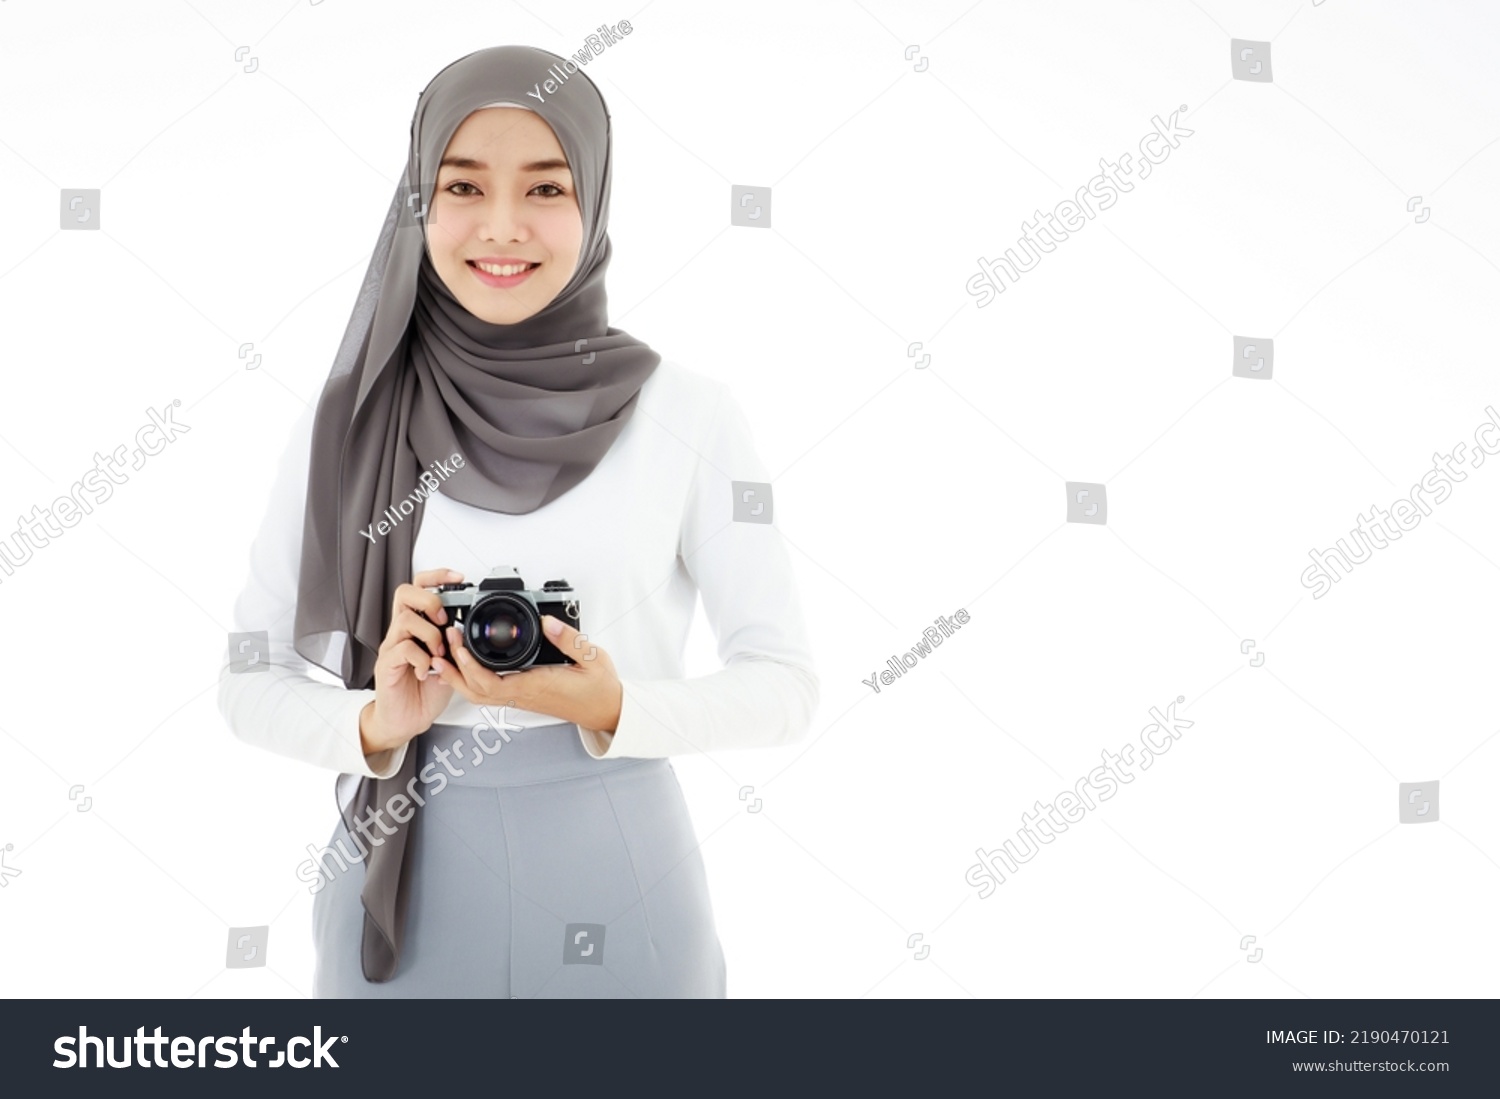 Young beautiful young Asian Islamic businesswoman holding a vintage camera. Muslim women concept with hobbies and art photography. #2190470121